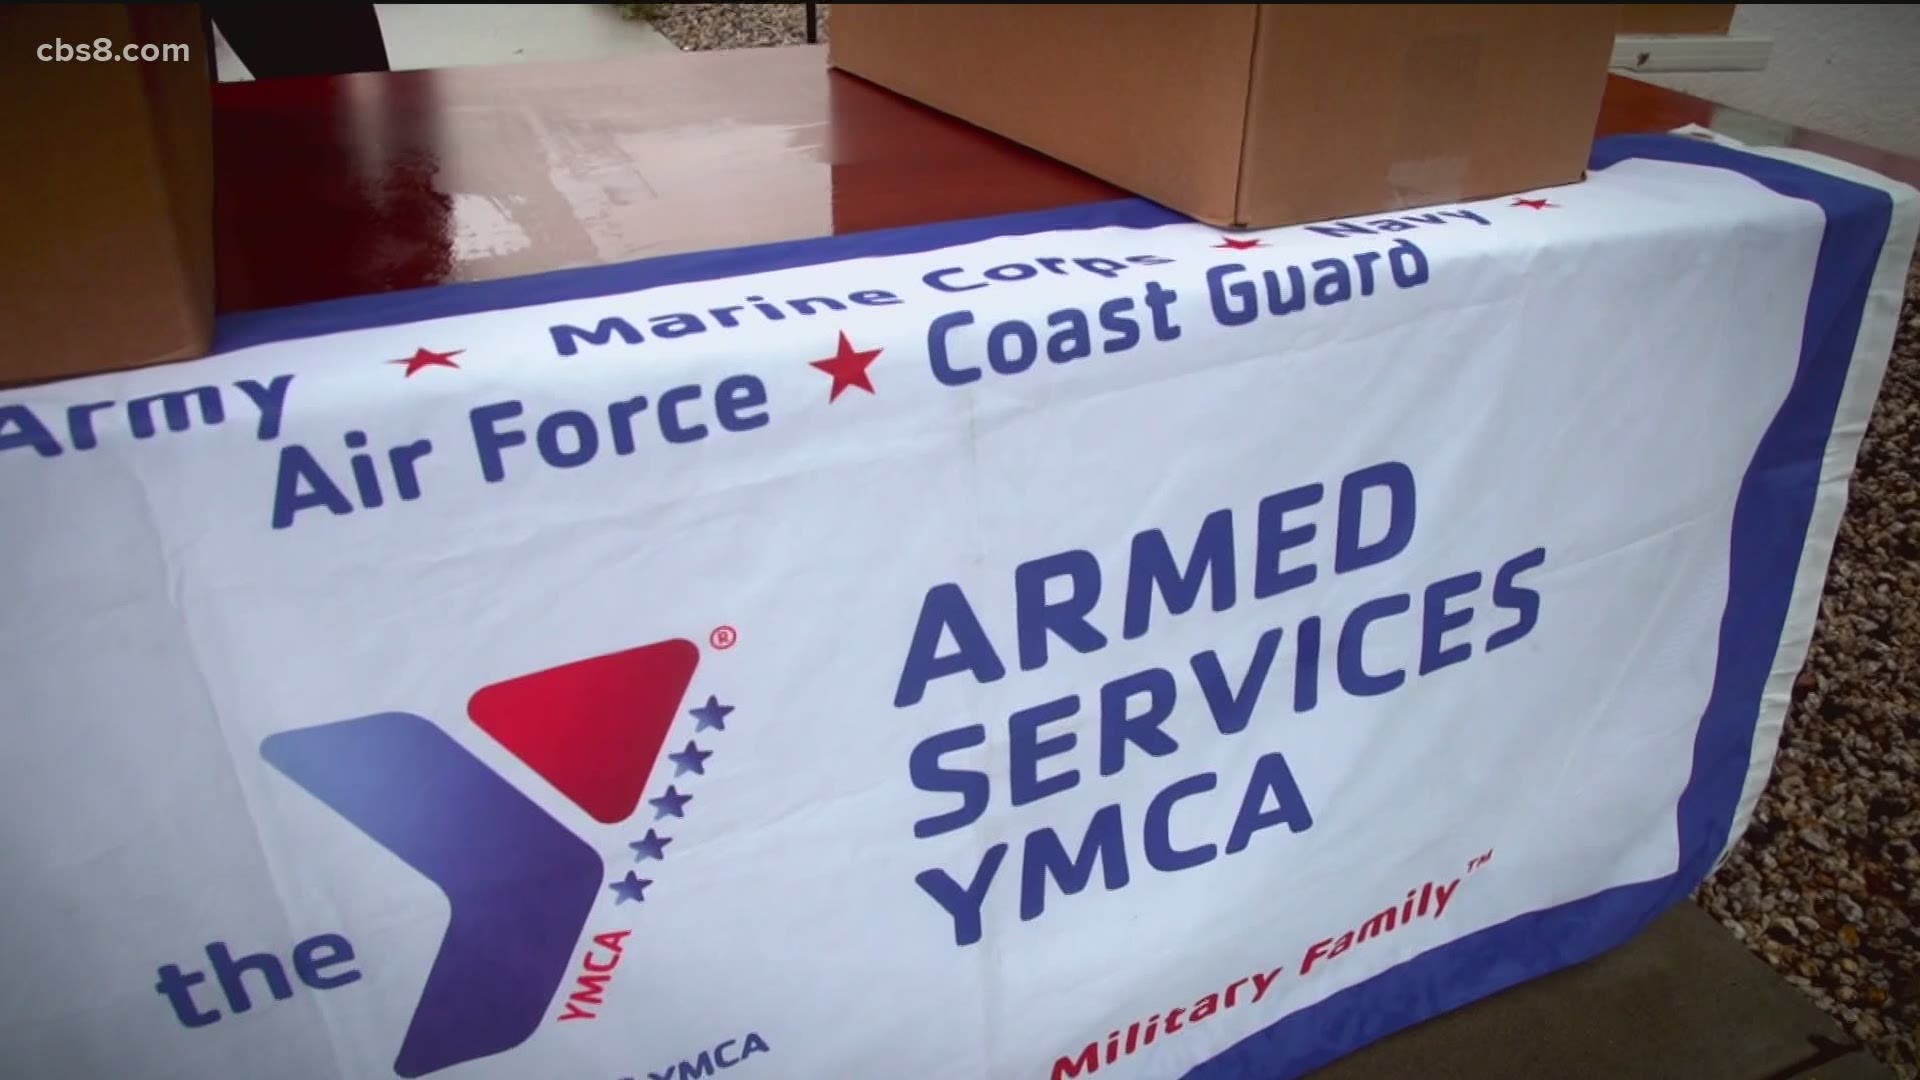 Armed Services YMCA San Diego says it went from serving a few hundred families a month to thousands a week.